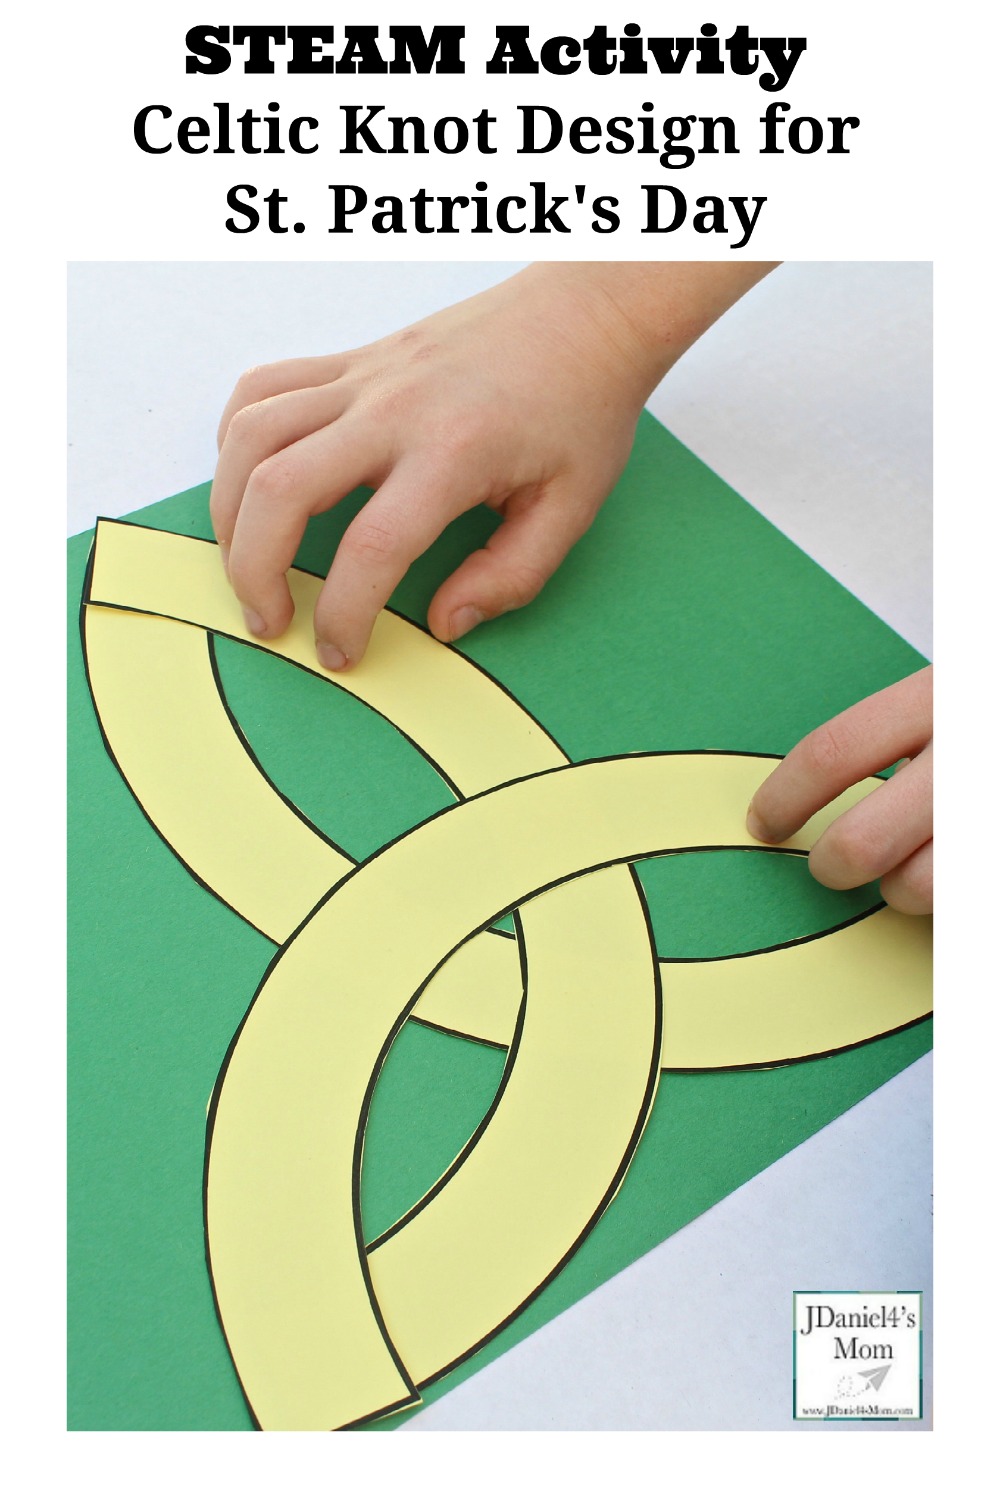 STEAM Activity Celtic Knot Design for St. Patrick's Day